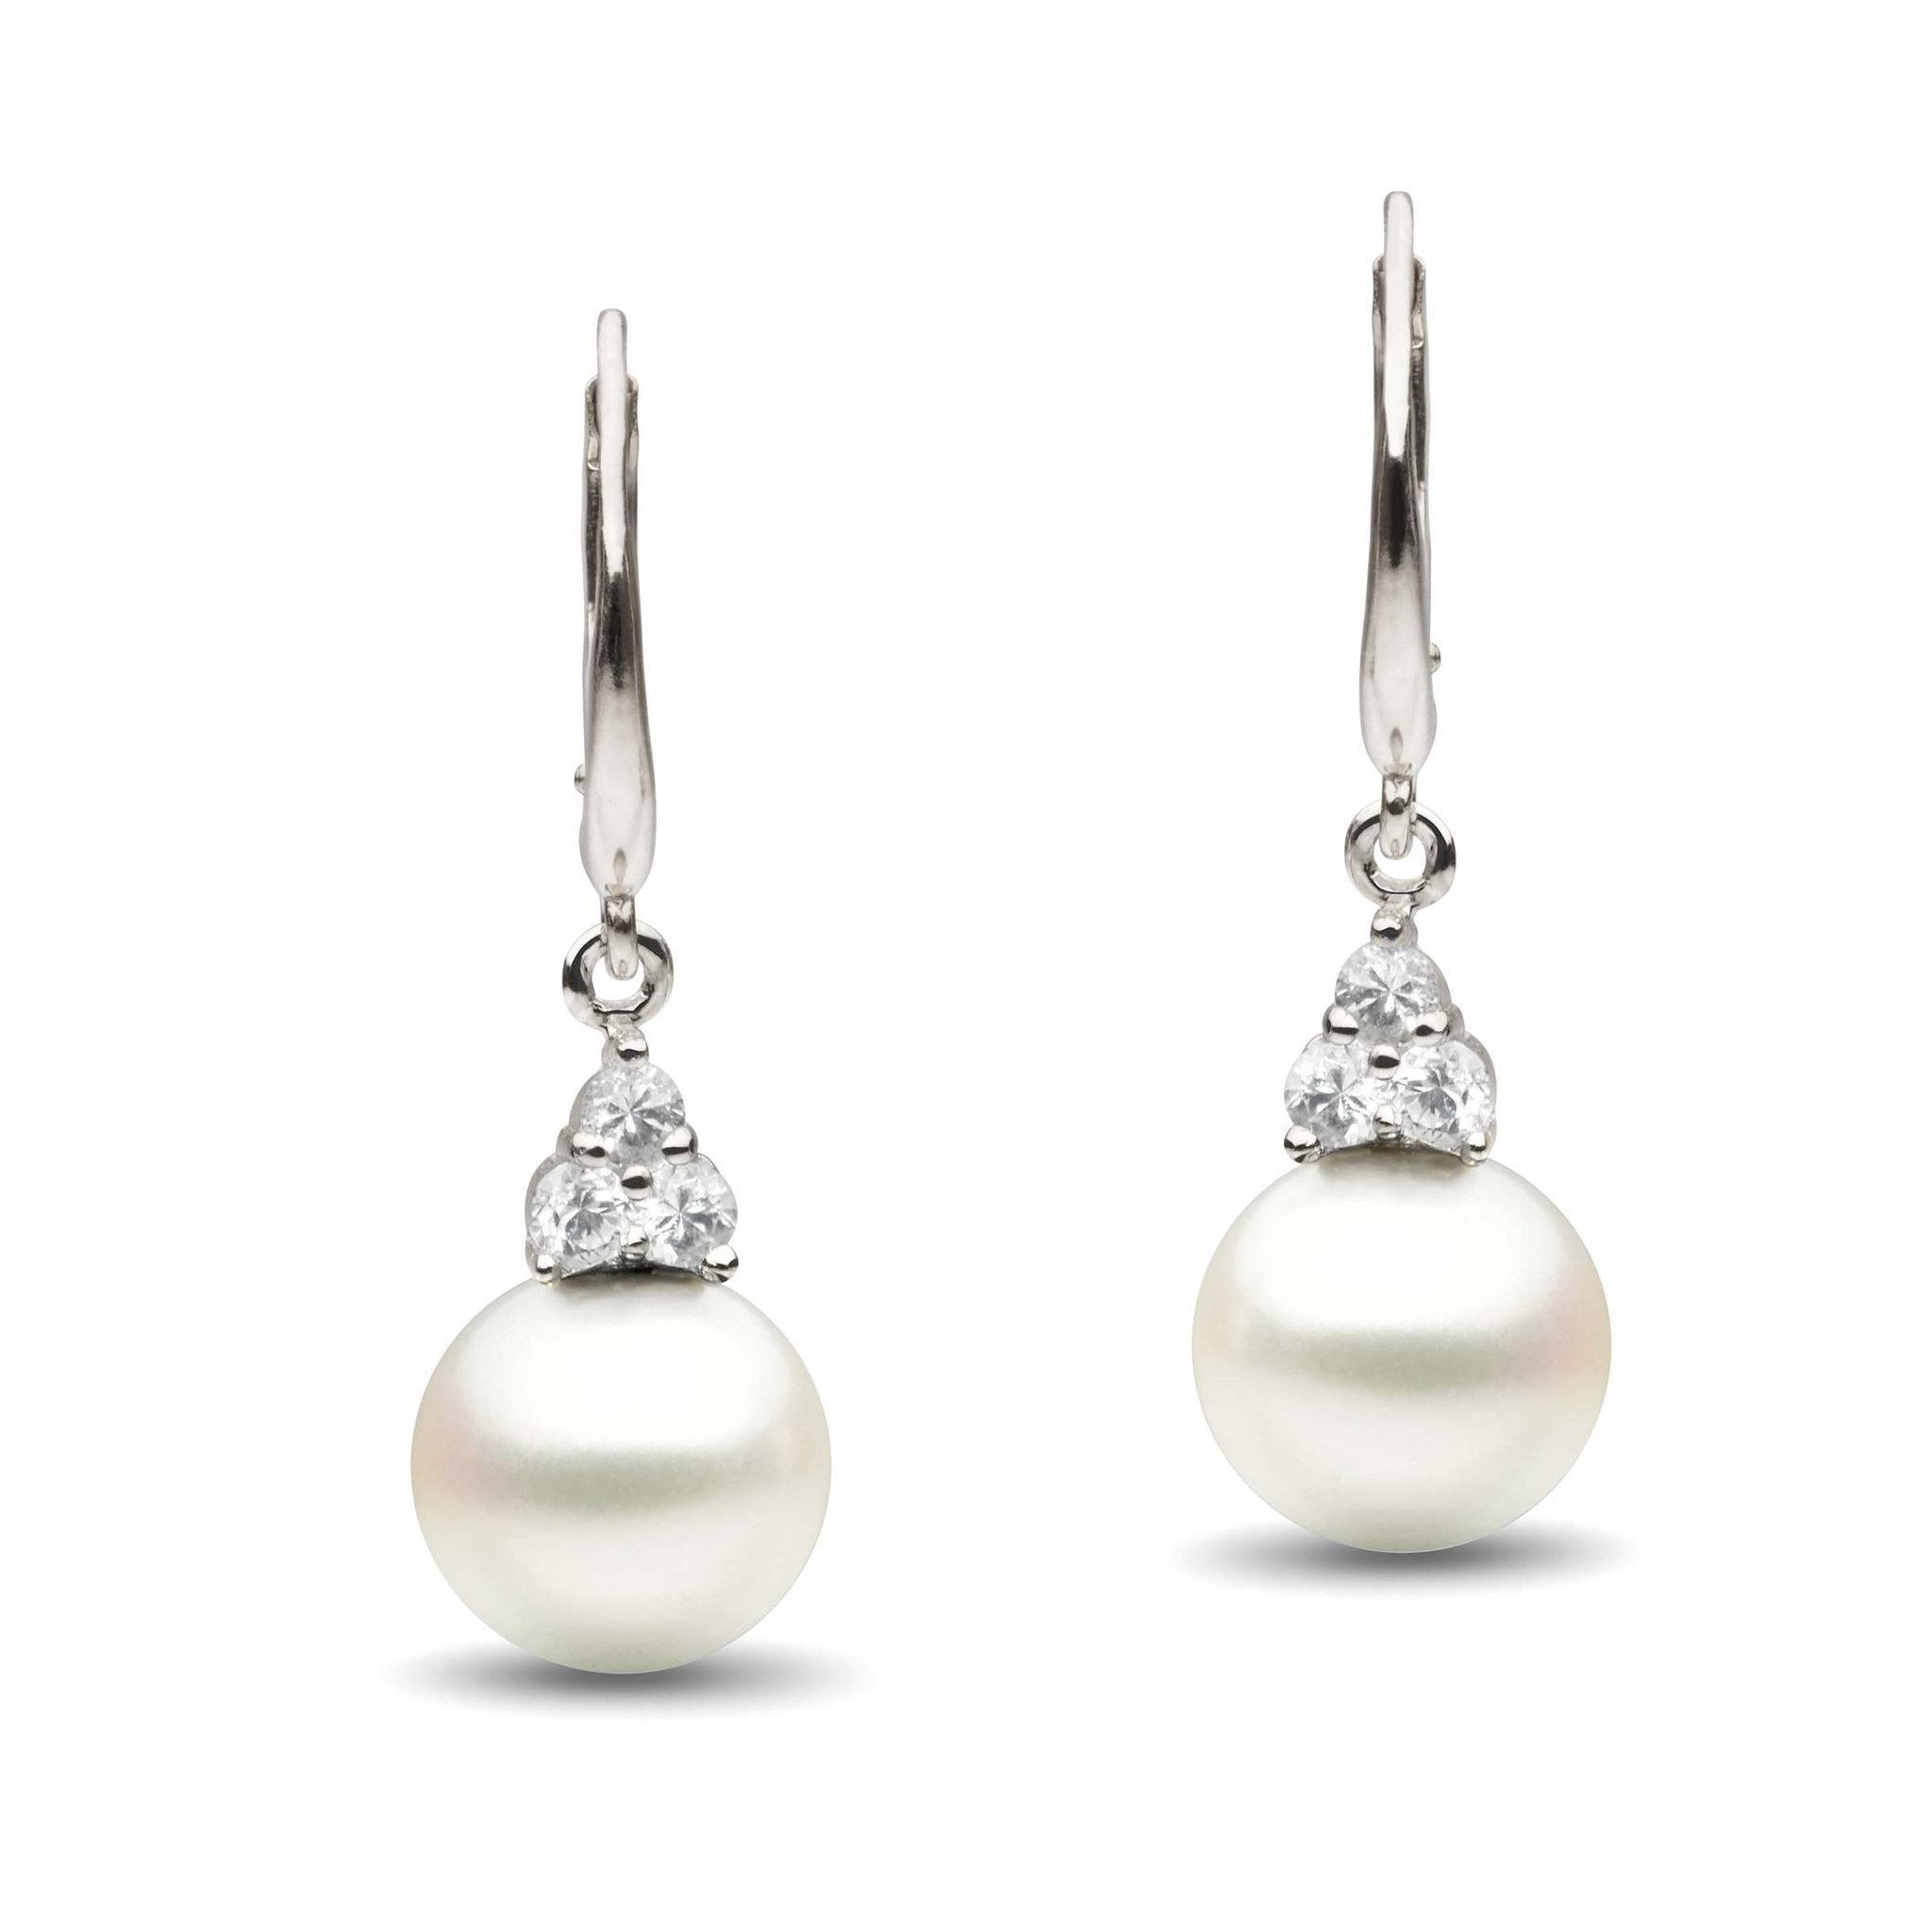 Always Collection White South Sea 9.0-10.0 mm Pearl and Diamond Earrings